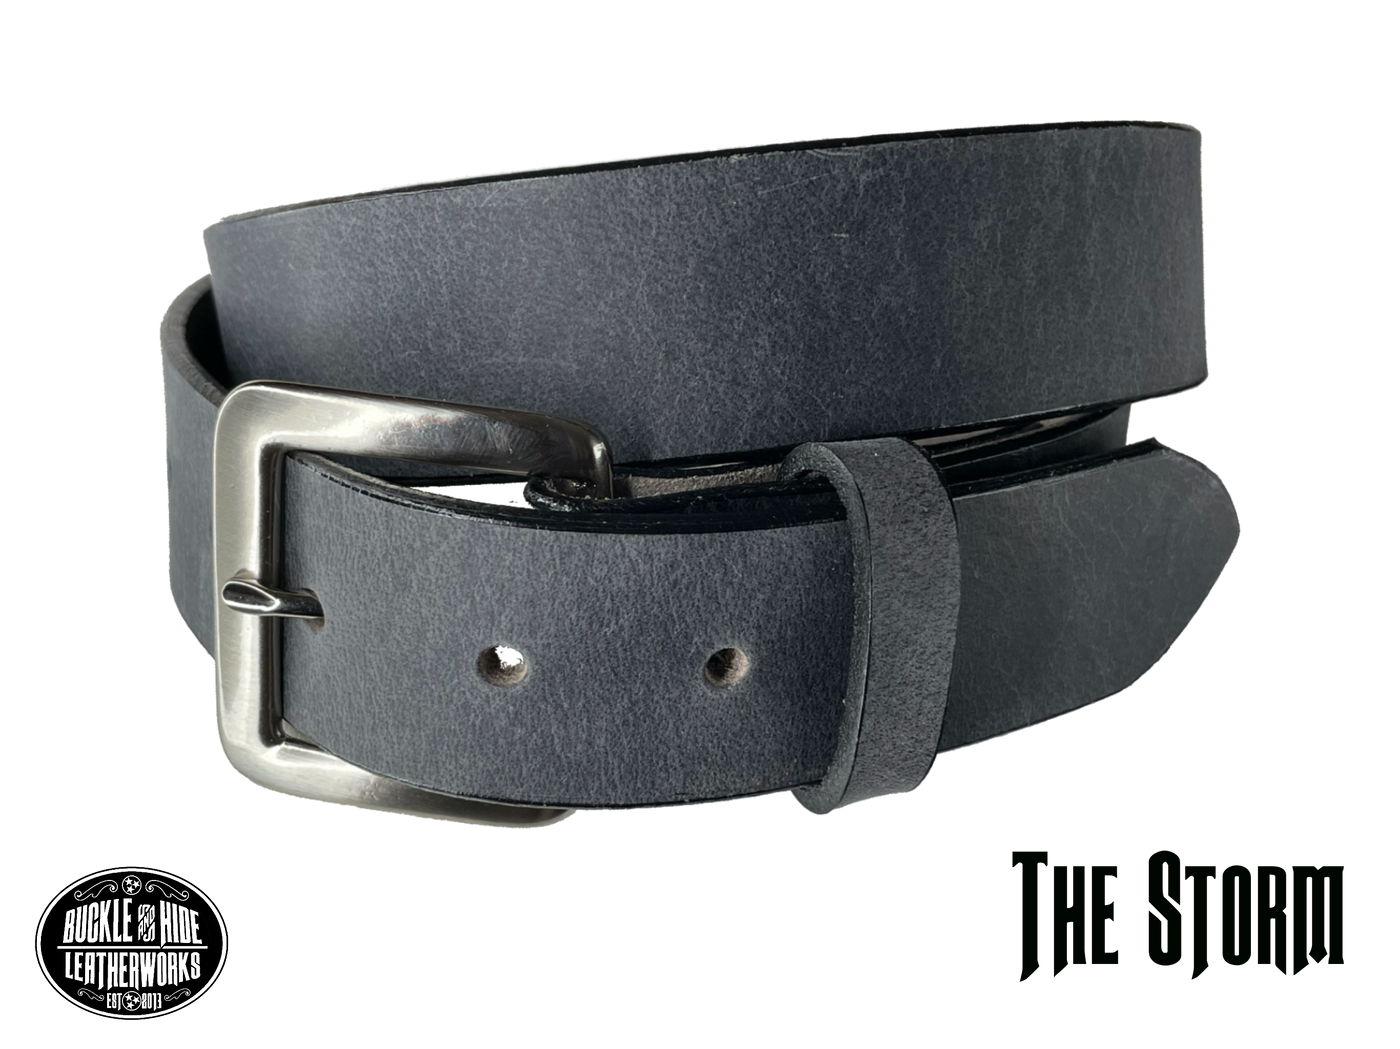 This gray leather belt is made from Crazy Horse tanned leather for that distressed and pull-up look. Choose with or without white stitching along the edges.  Has smooth black painted edges. It has an antique solid brass buckle that is snapped in place. Belt is 1 1/2" wide and available in lengths from 34" to 44".  It is handmade in our shop in Smyrna, TN, just outside of Nashville.